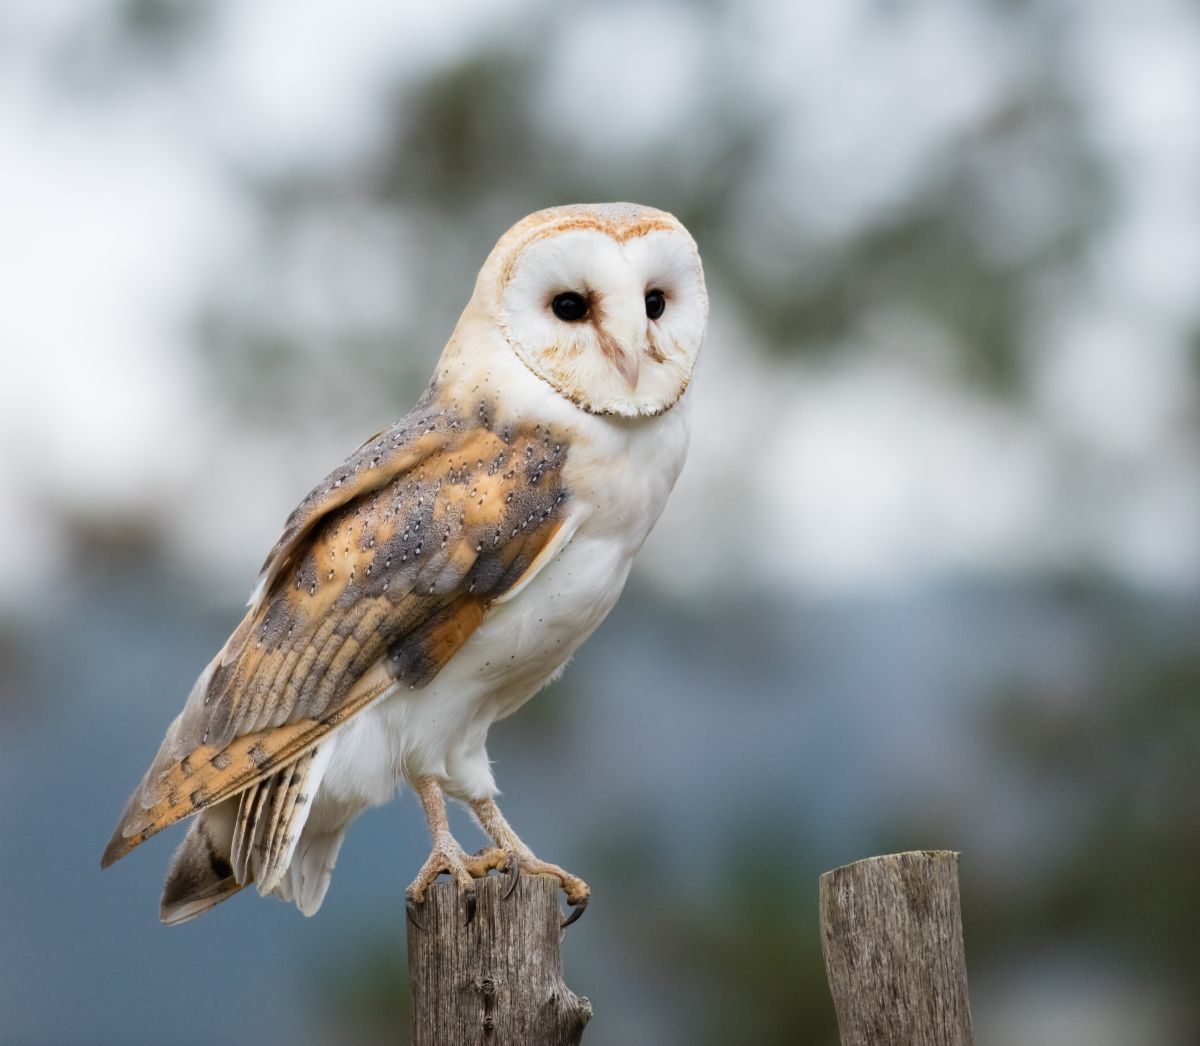 A beautiful Barn Owl perched on a wooden pole.